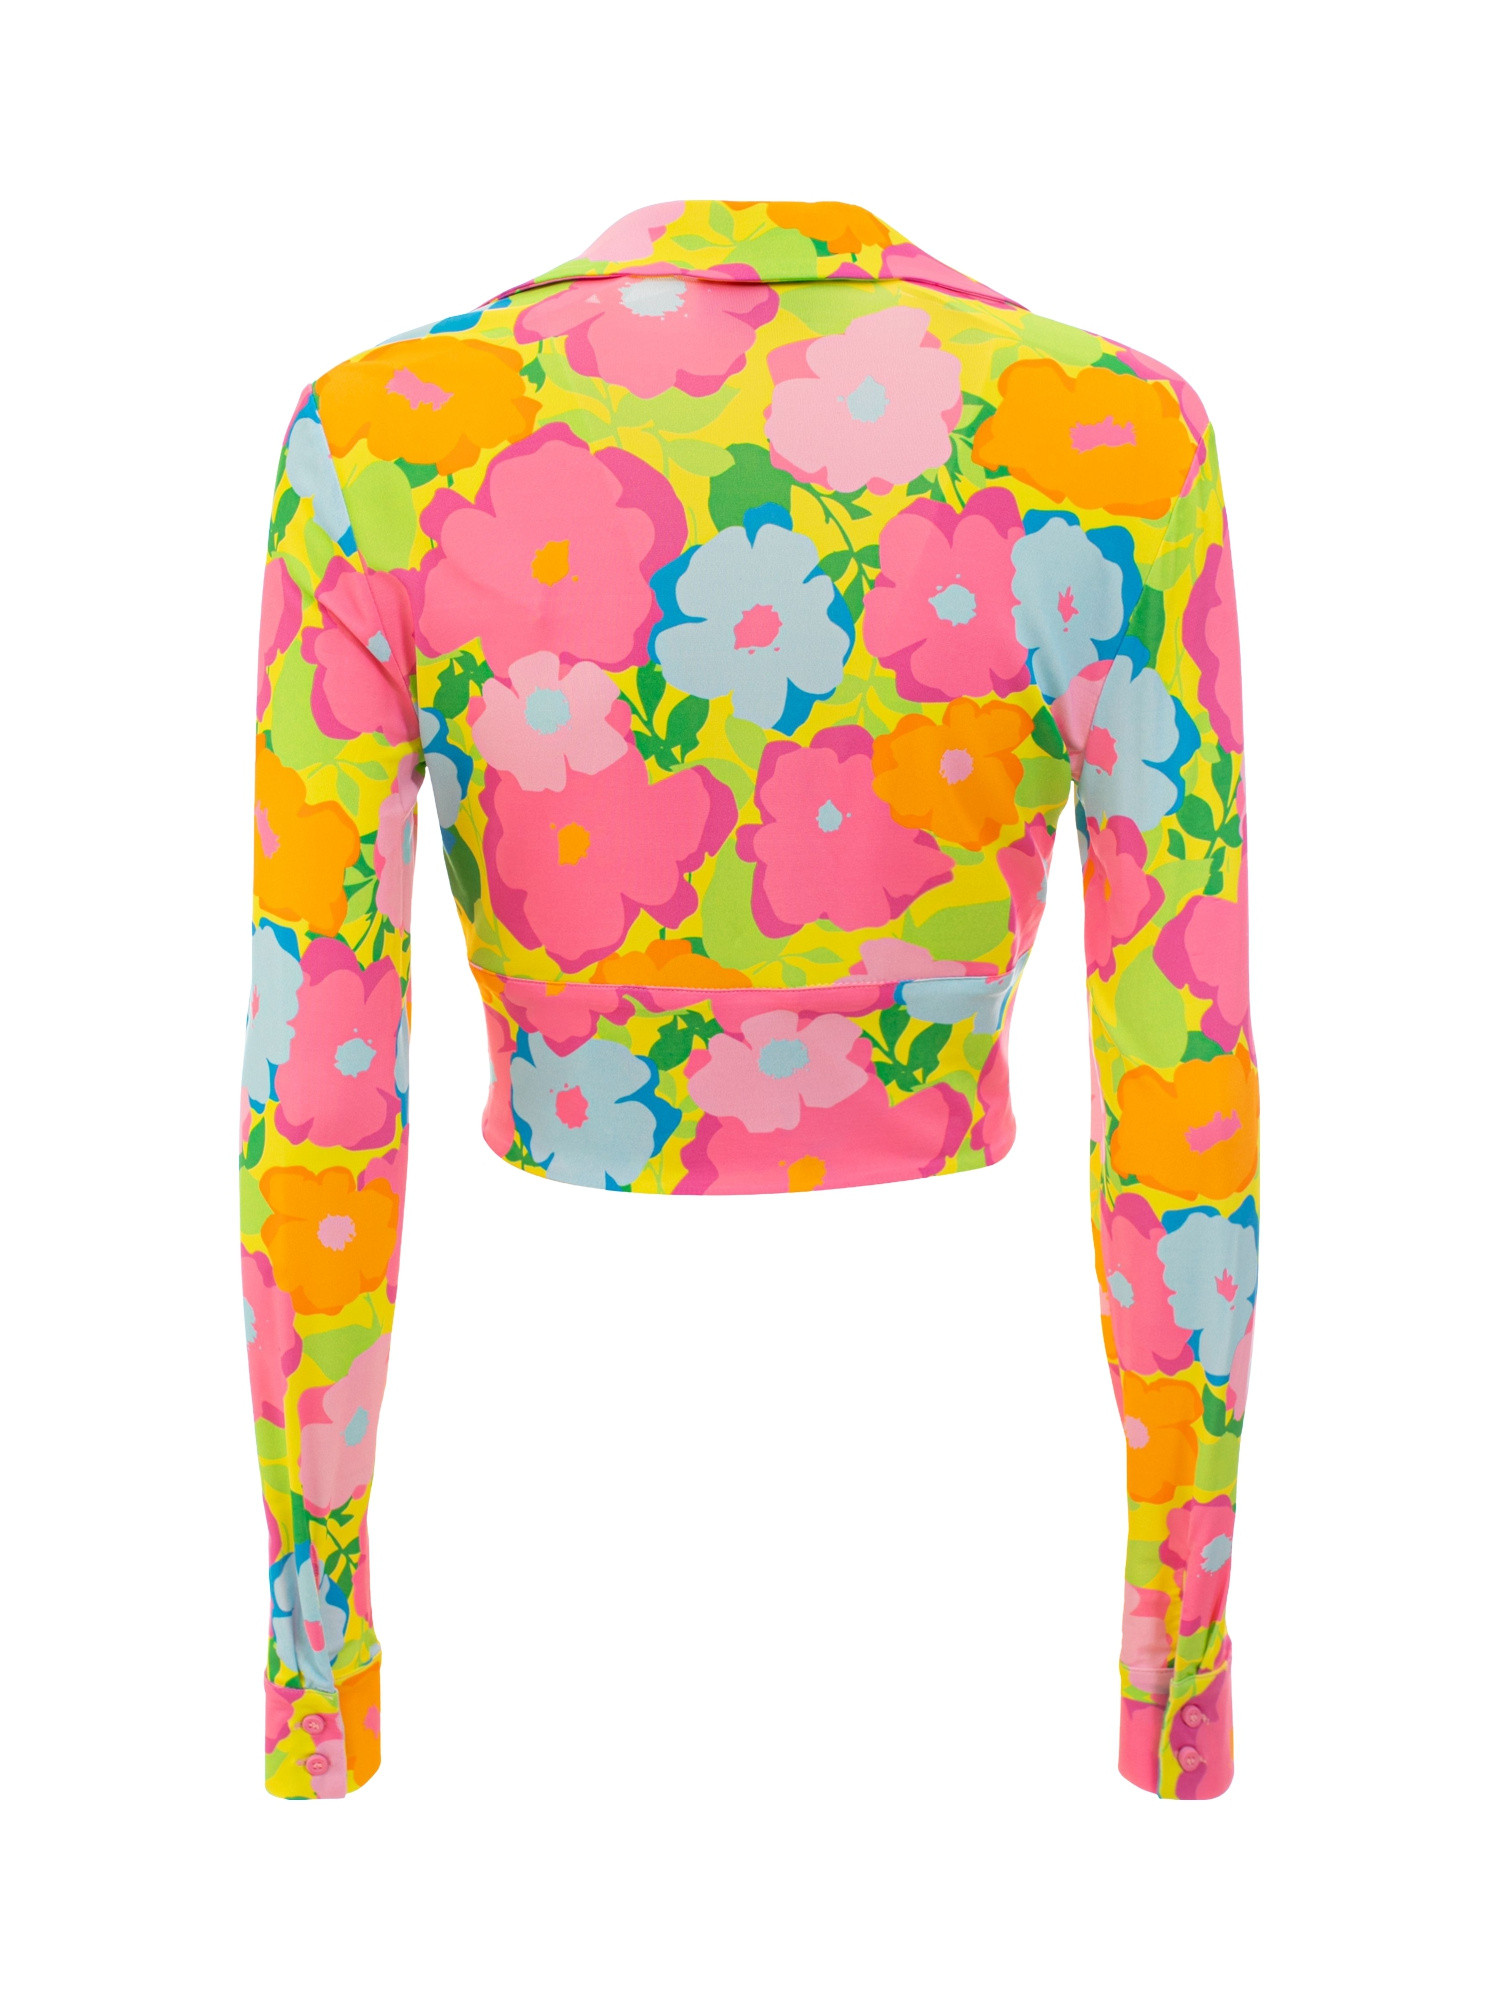 Chiara Ferragni - Cropped shirt in flower print jersey, Multicolor, large image number 1